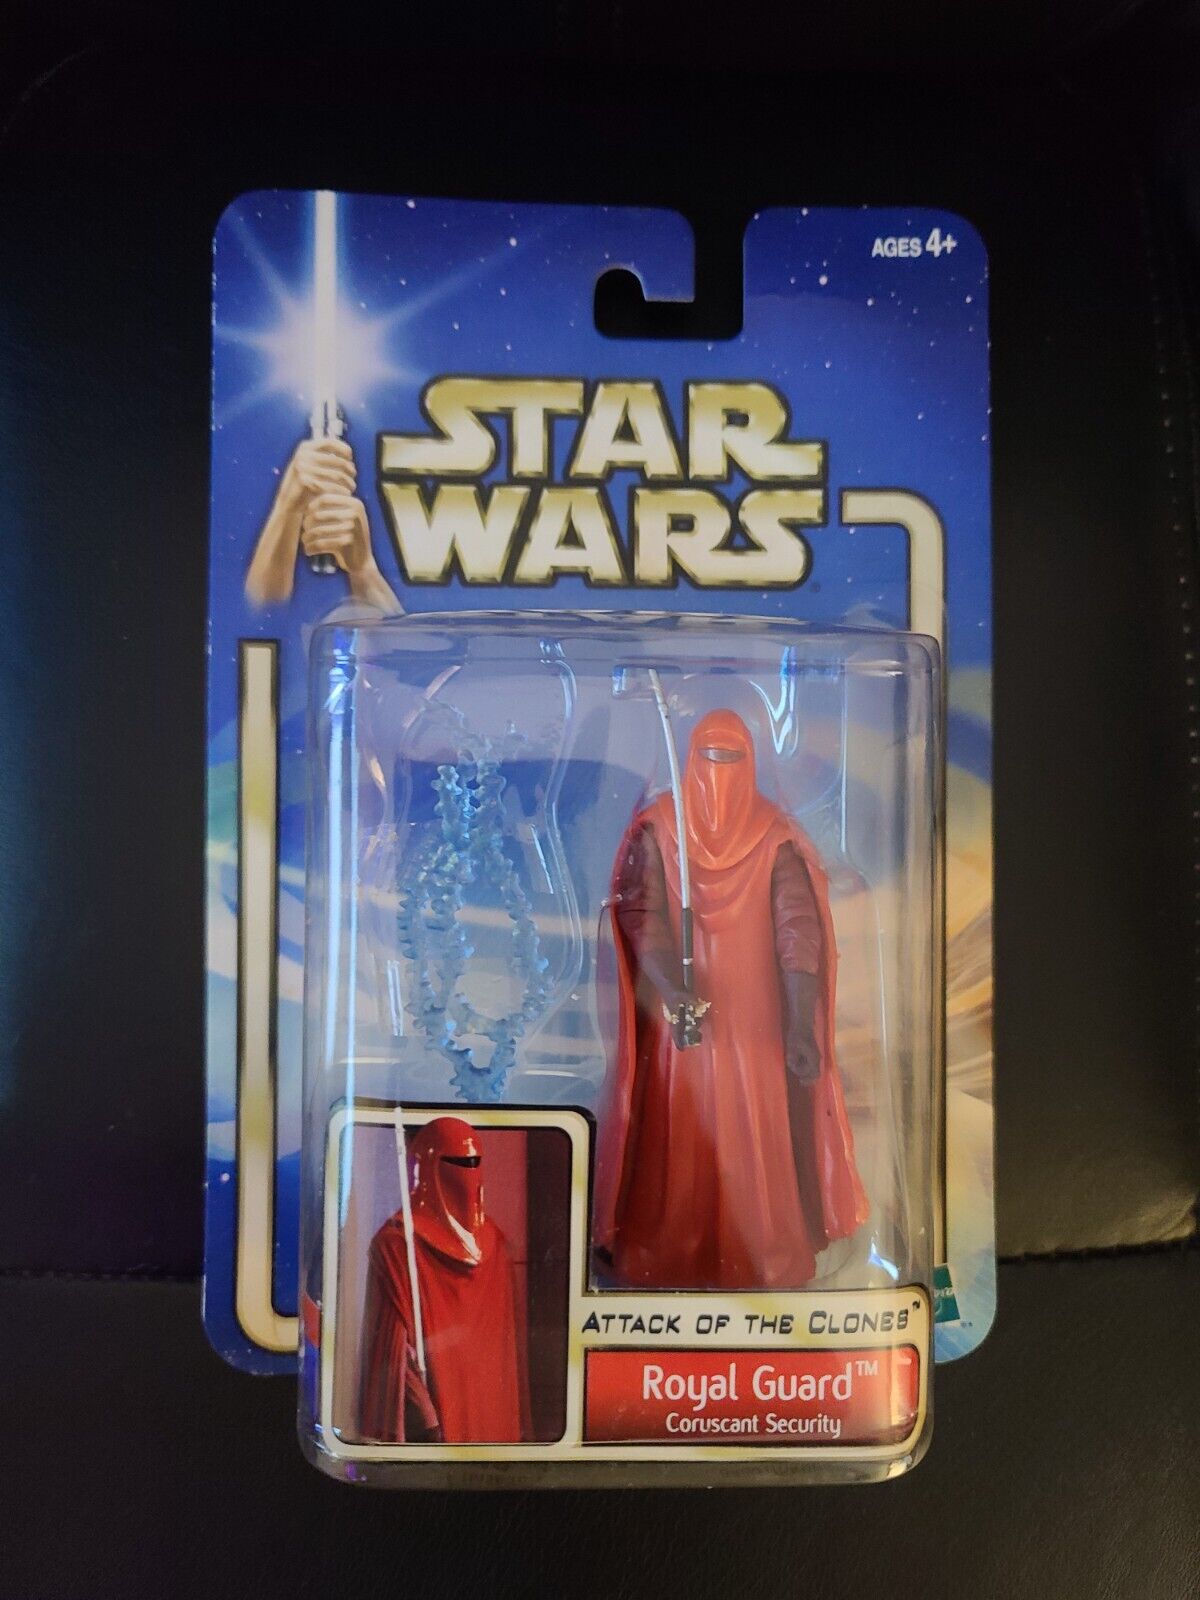 HASBRO STAR WARS ATTACK OF THE CLONES ROYAL GUARD COLLECTION 2 FIGURE BRAND NEW